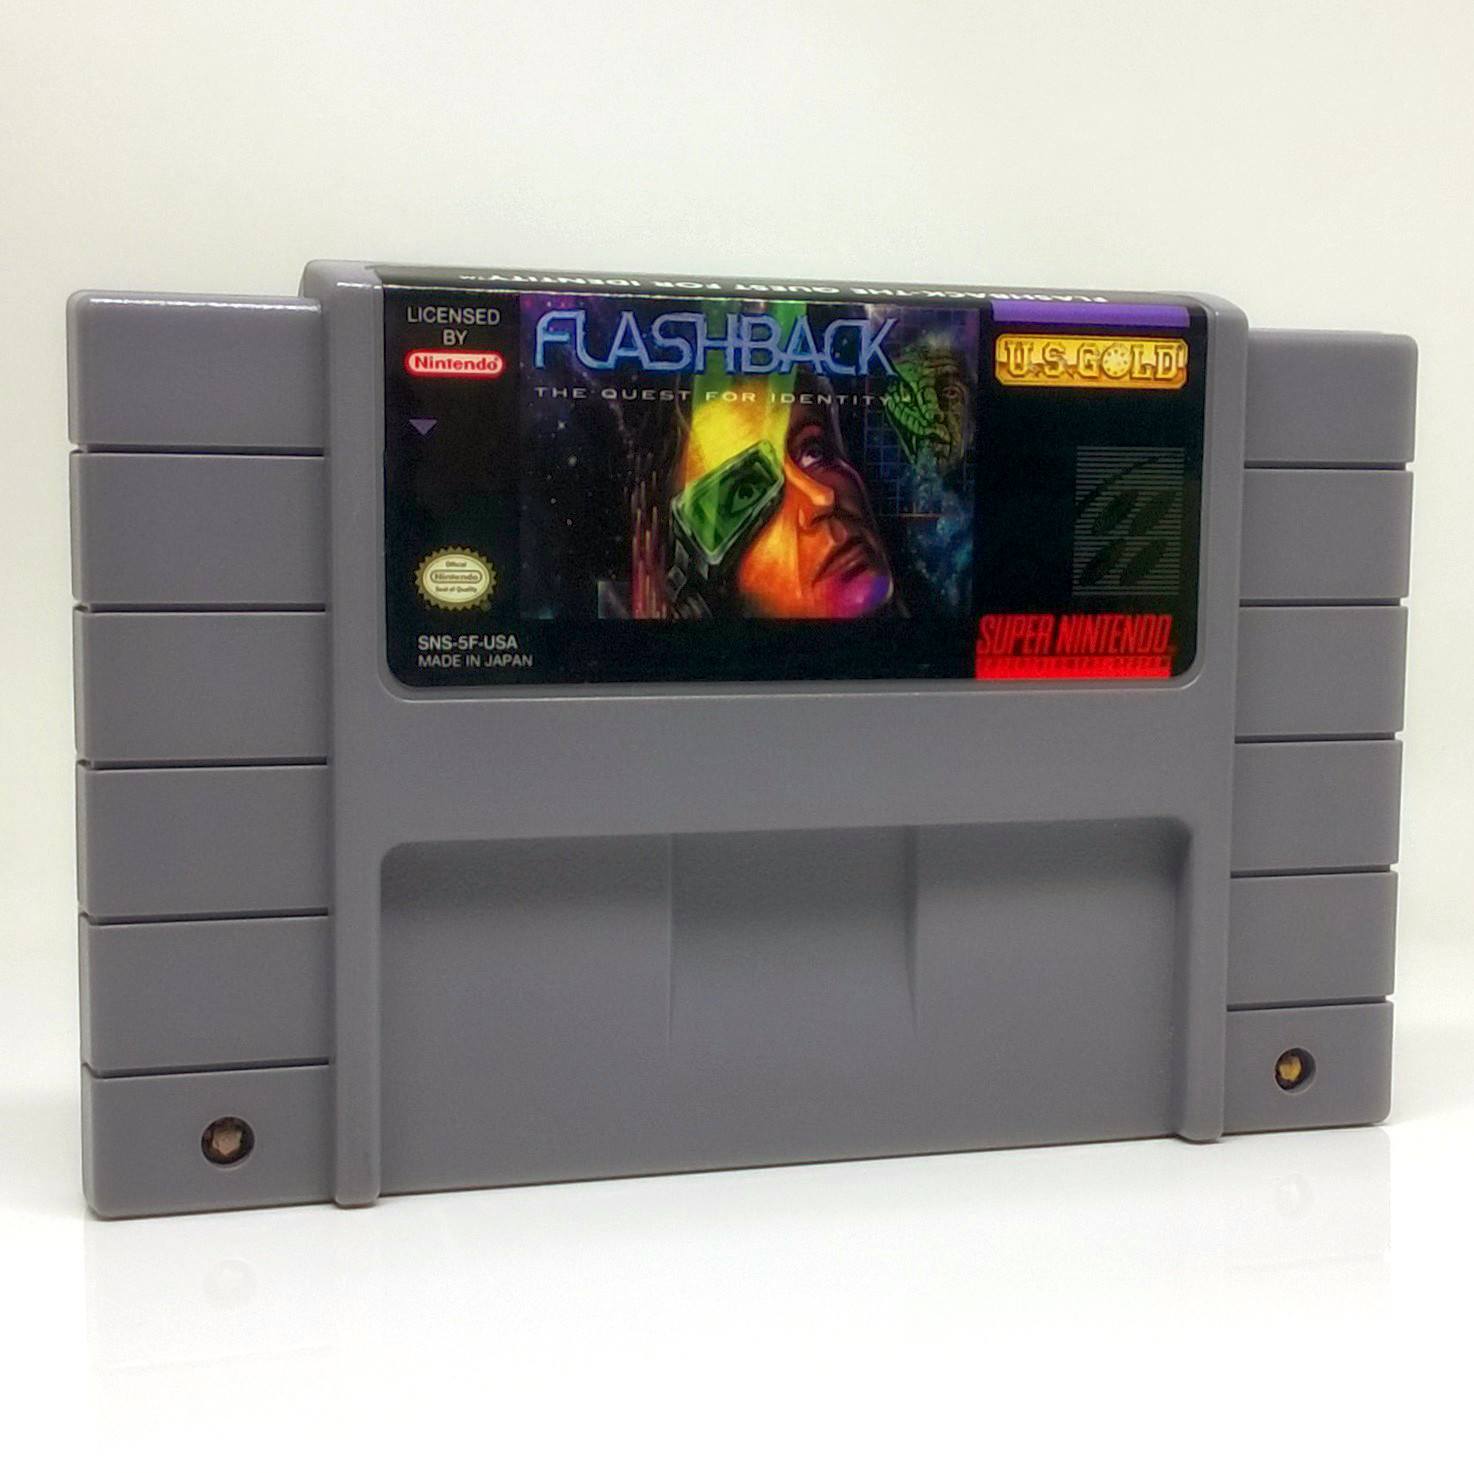 Flashback: The Quest for Identity SNES Super Nintendo Game